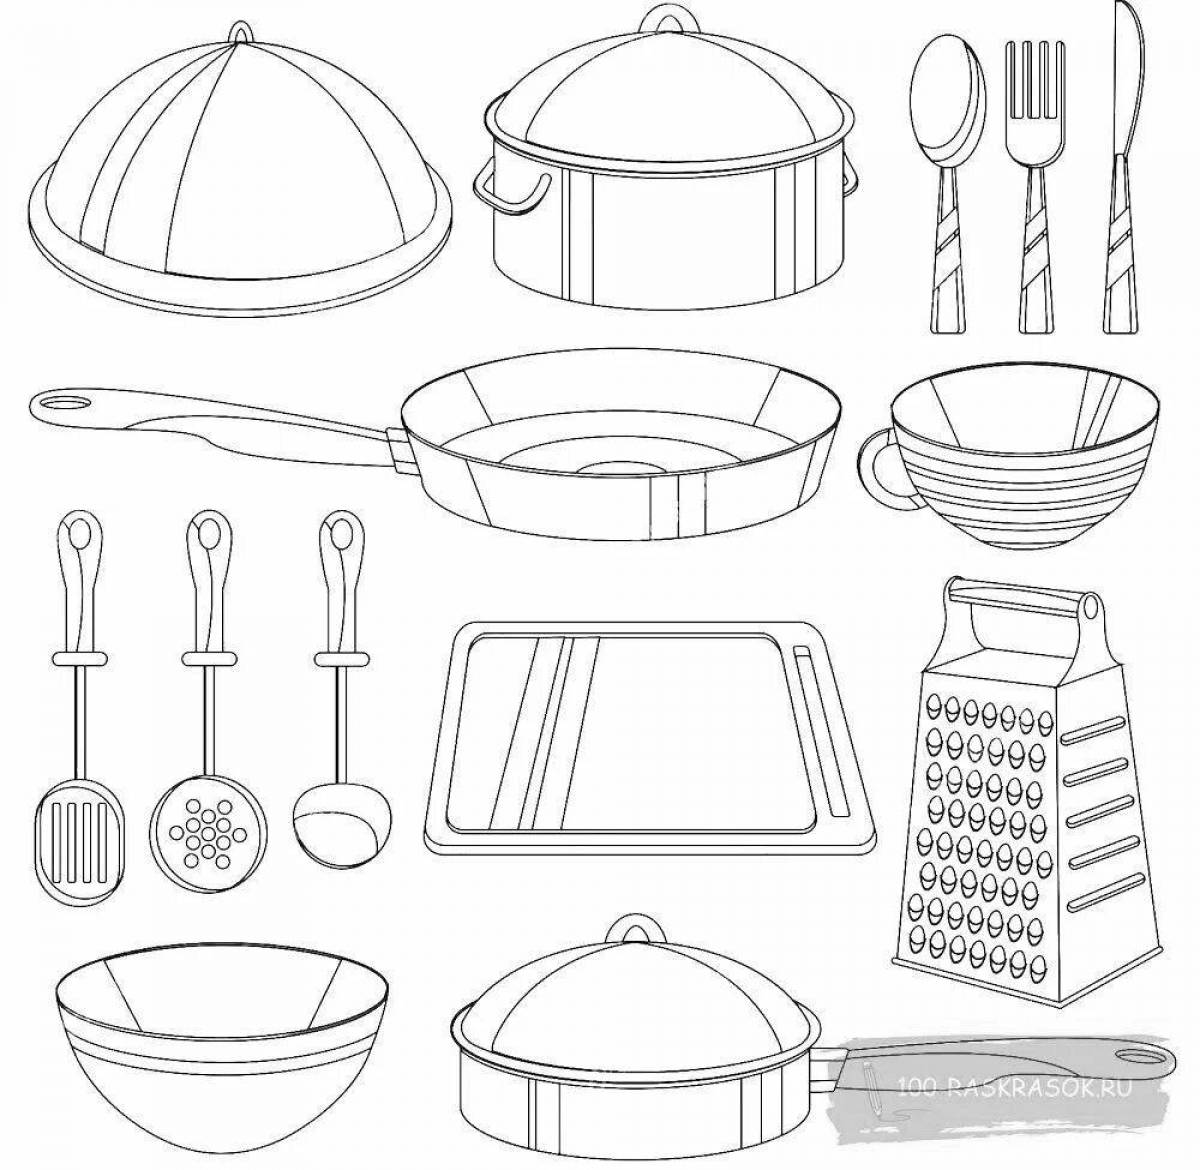 Coloring book dazzling dishes